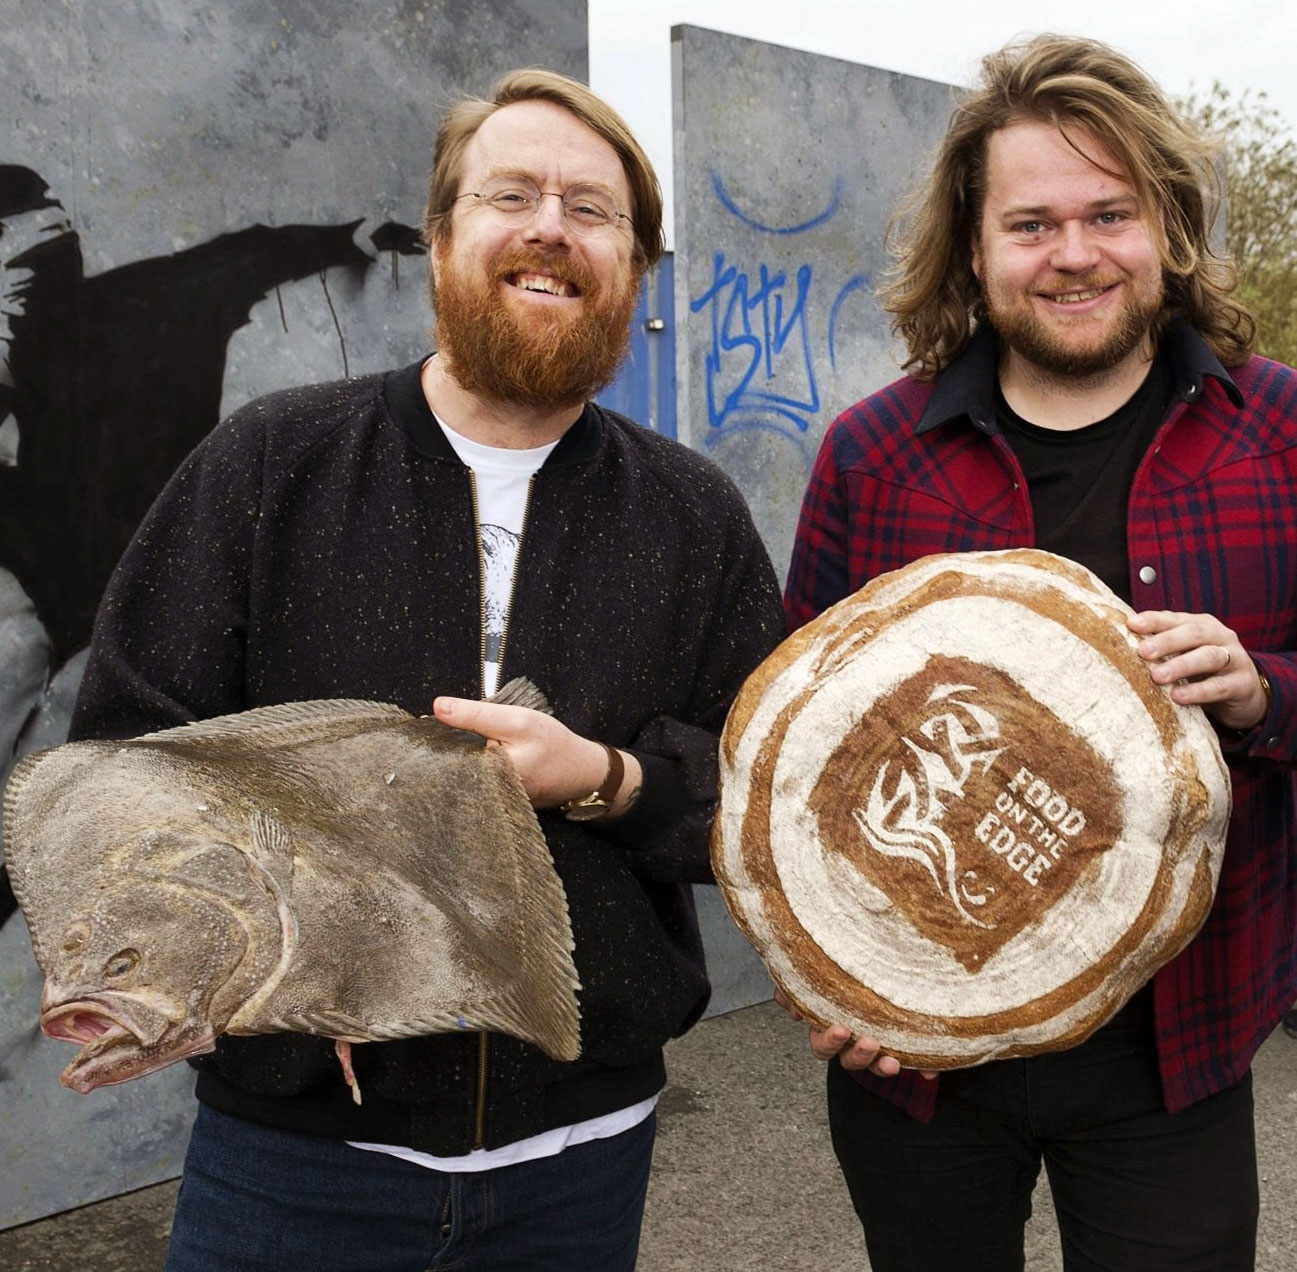 Jp McMahon and Magnus Nilsson at Food On The Edge 2017. Image courtesy of Food on the Edge